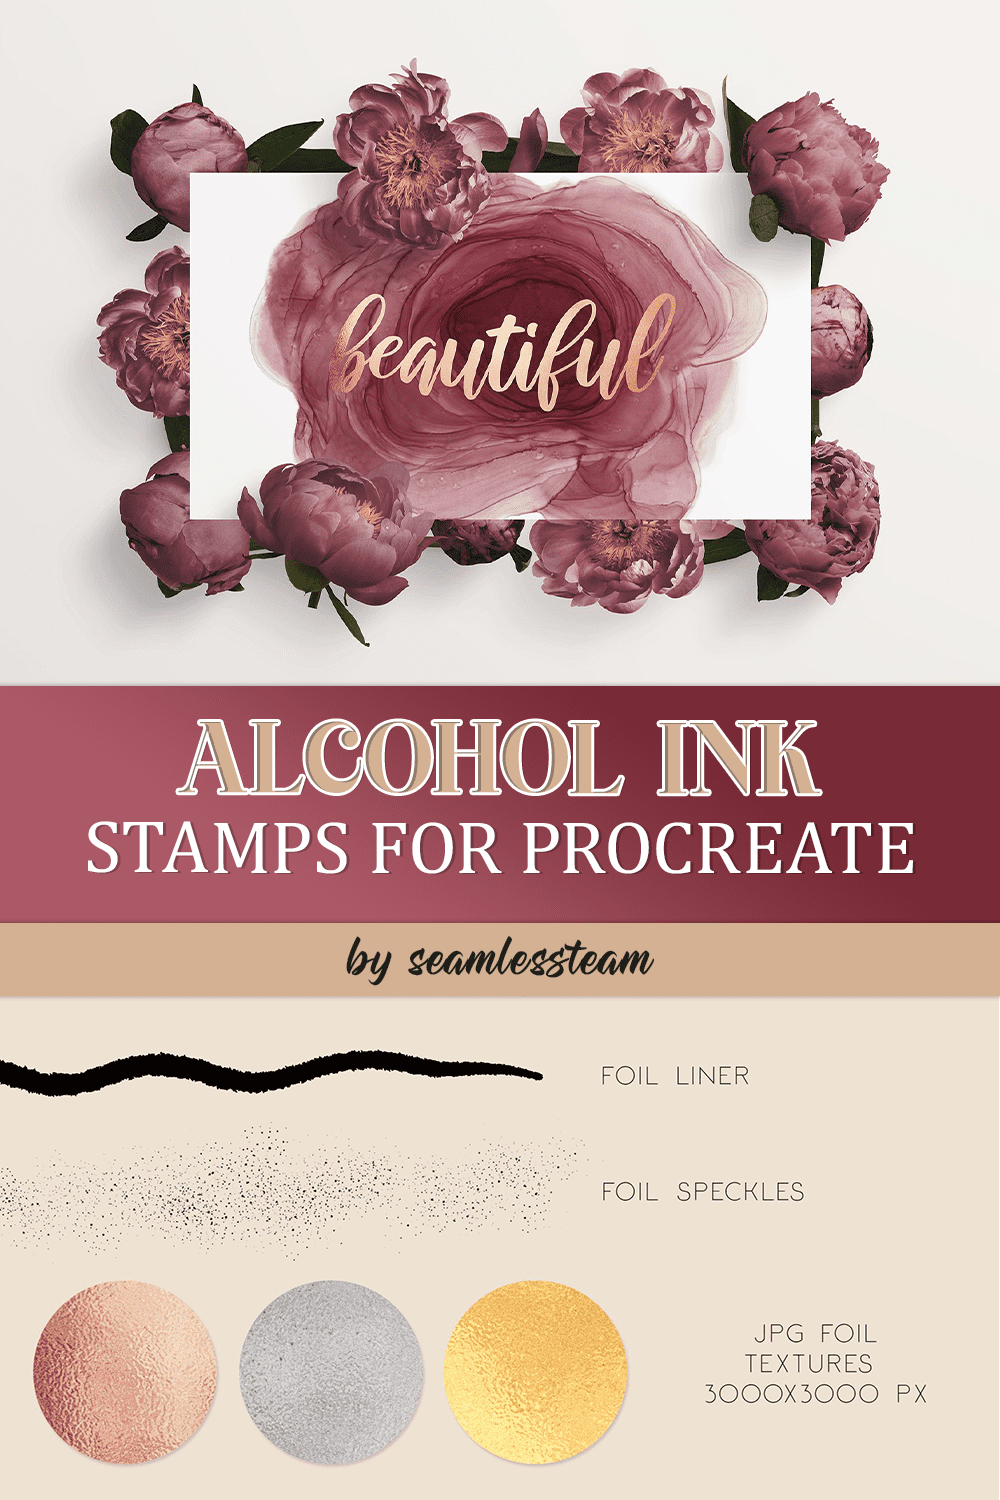 Alcohol Ink Stamps For Procreate - Pinterest.